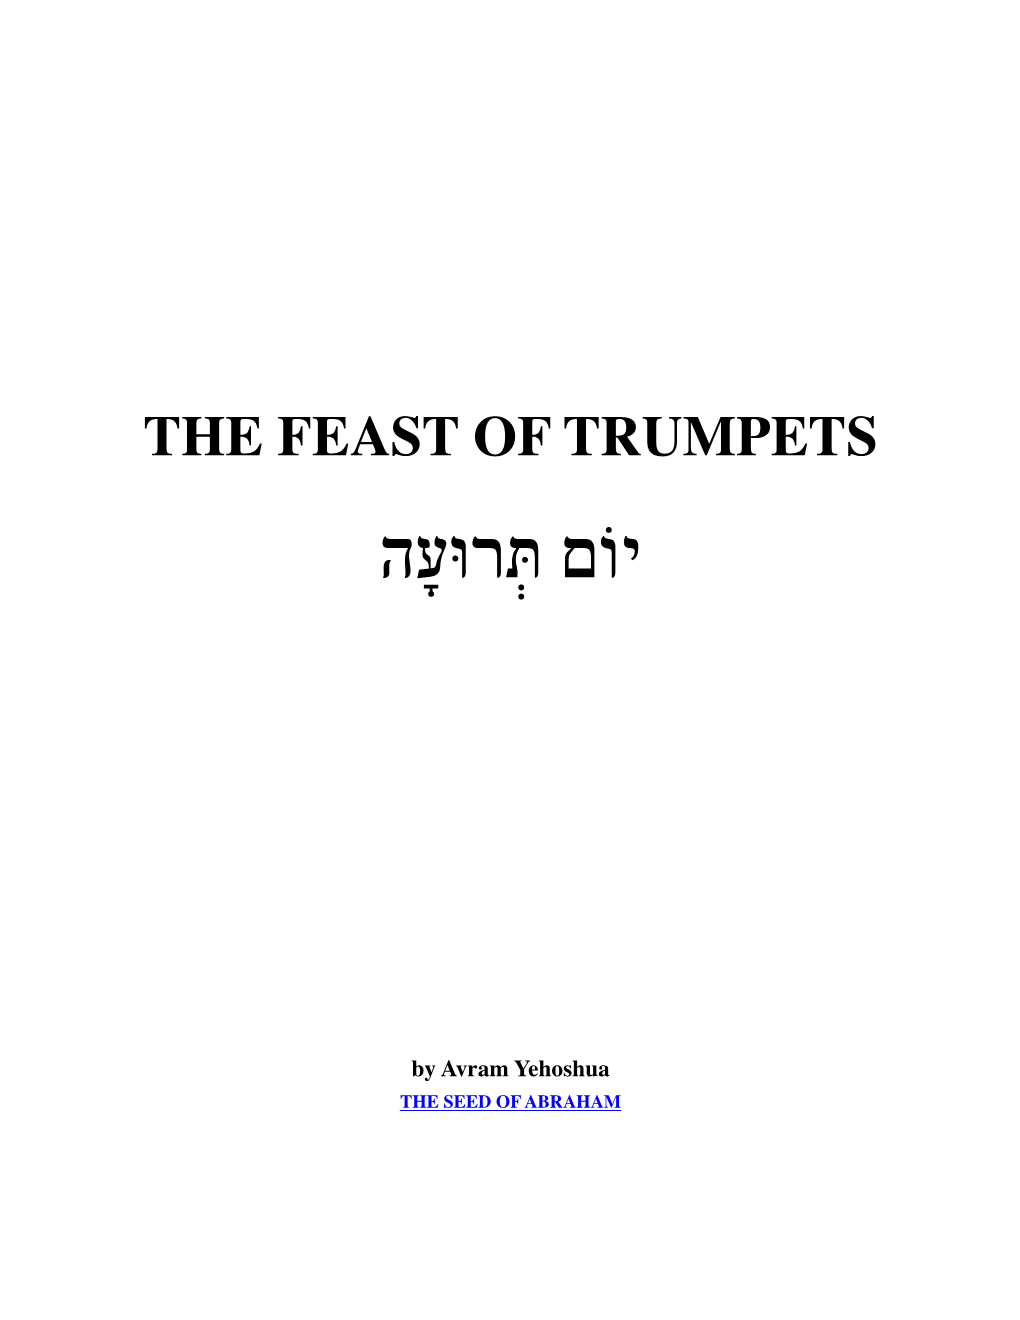 The Feast of Trumpets